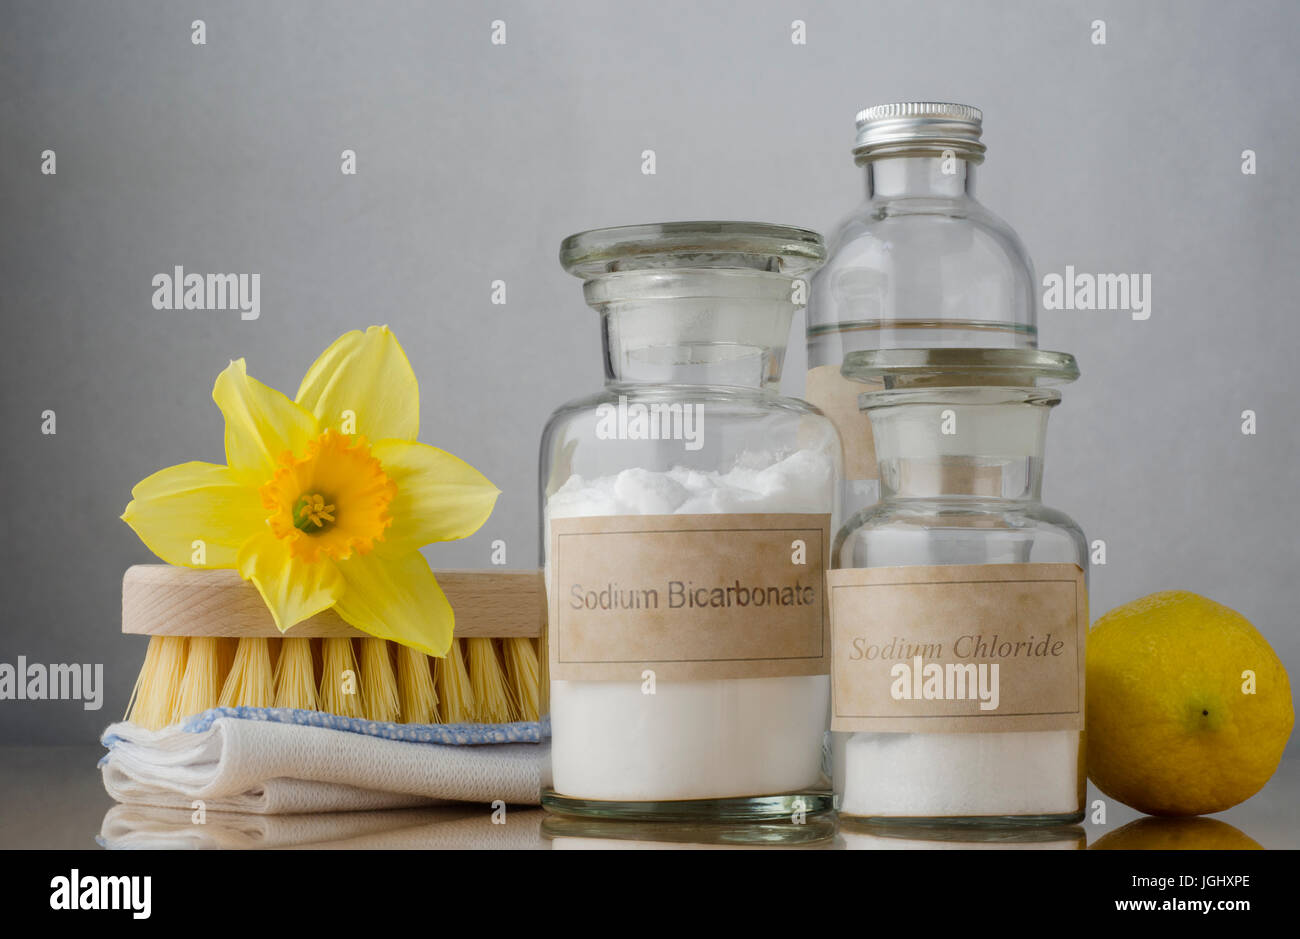 Still life of natural cleaning choices.  Sodium bicarbonate and salt in apothecary jars, white vinegar behind them and a lemon to the right.  A folded Stock Photo